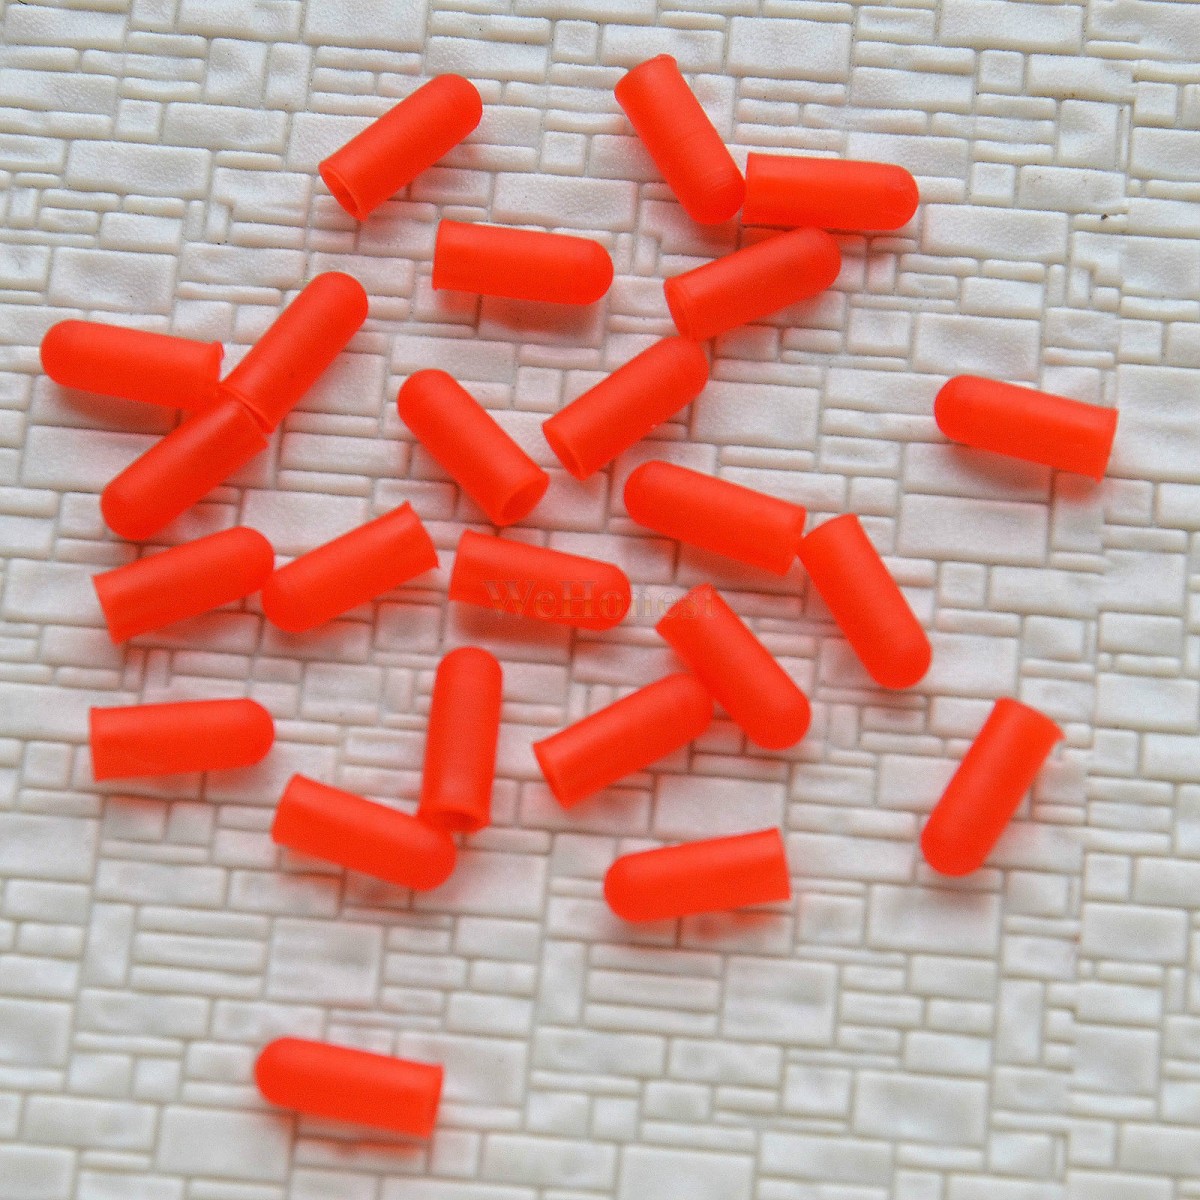 20 pcs Red Caps / Covers for 4mm, 4.7mm or 5mm Grain of Wheat Bulbs or LEDs